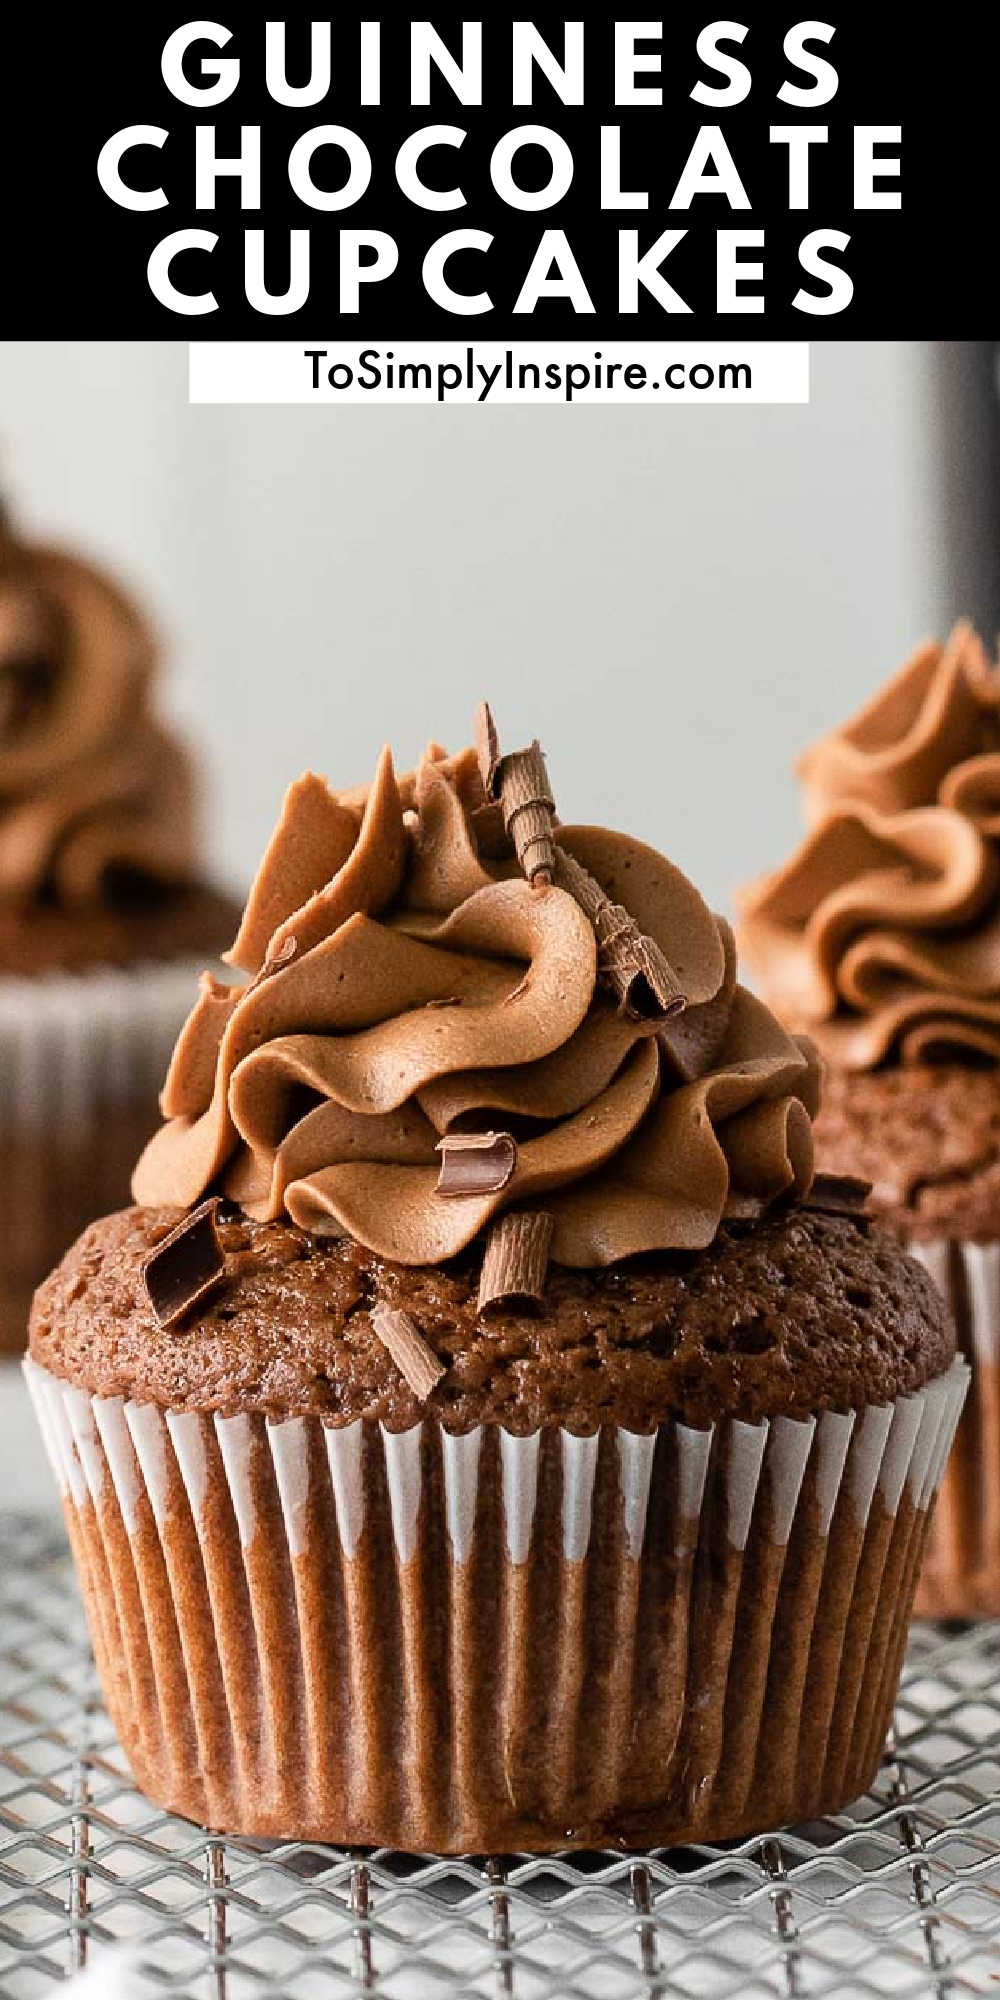 Best Guinness Chocolate Cupcakes - To Simply Inspire